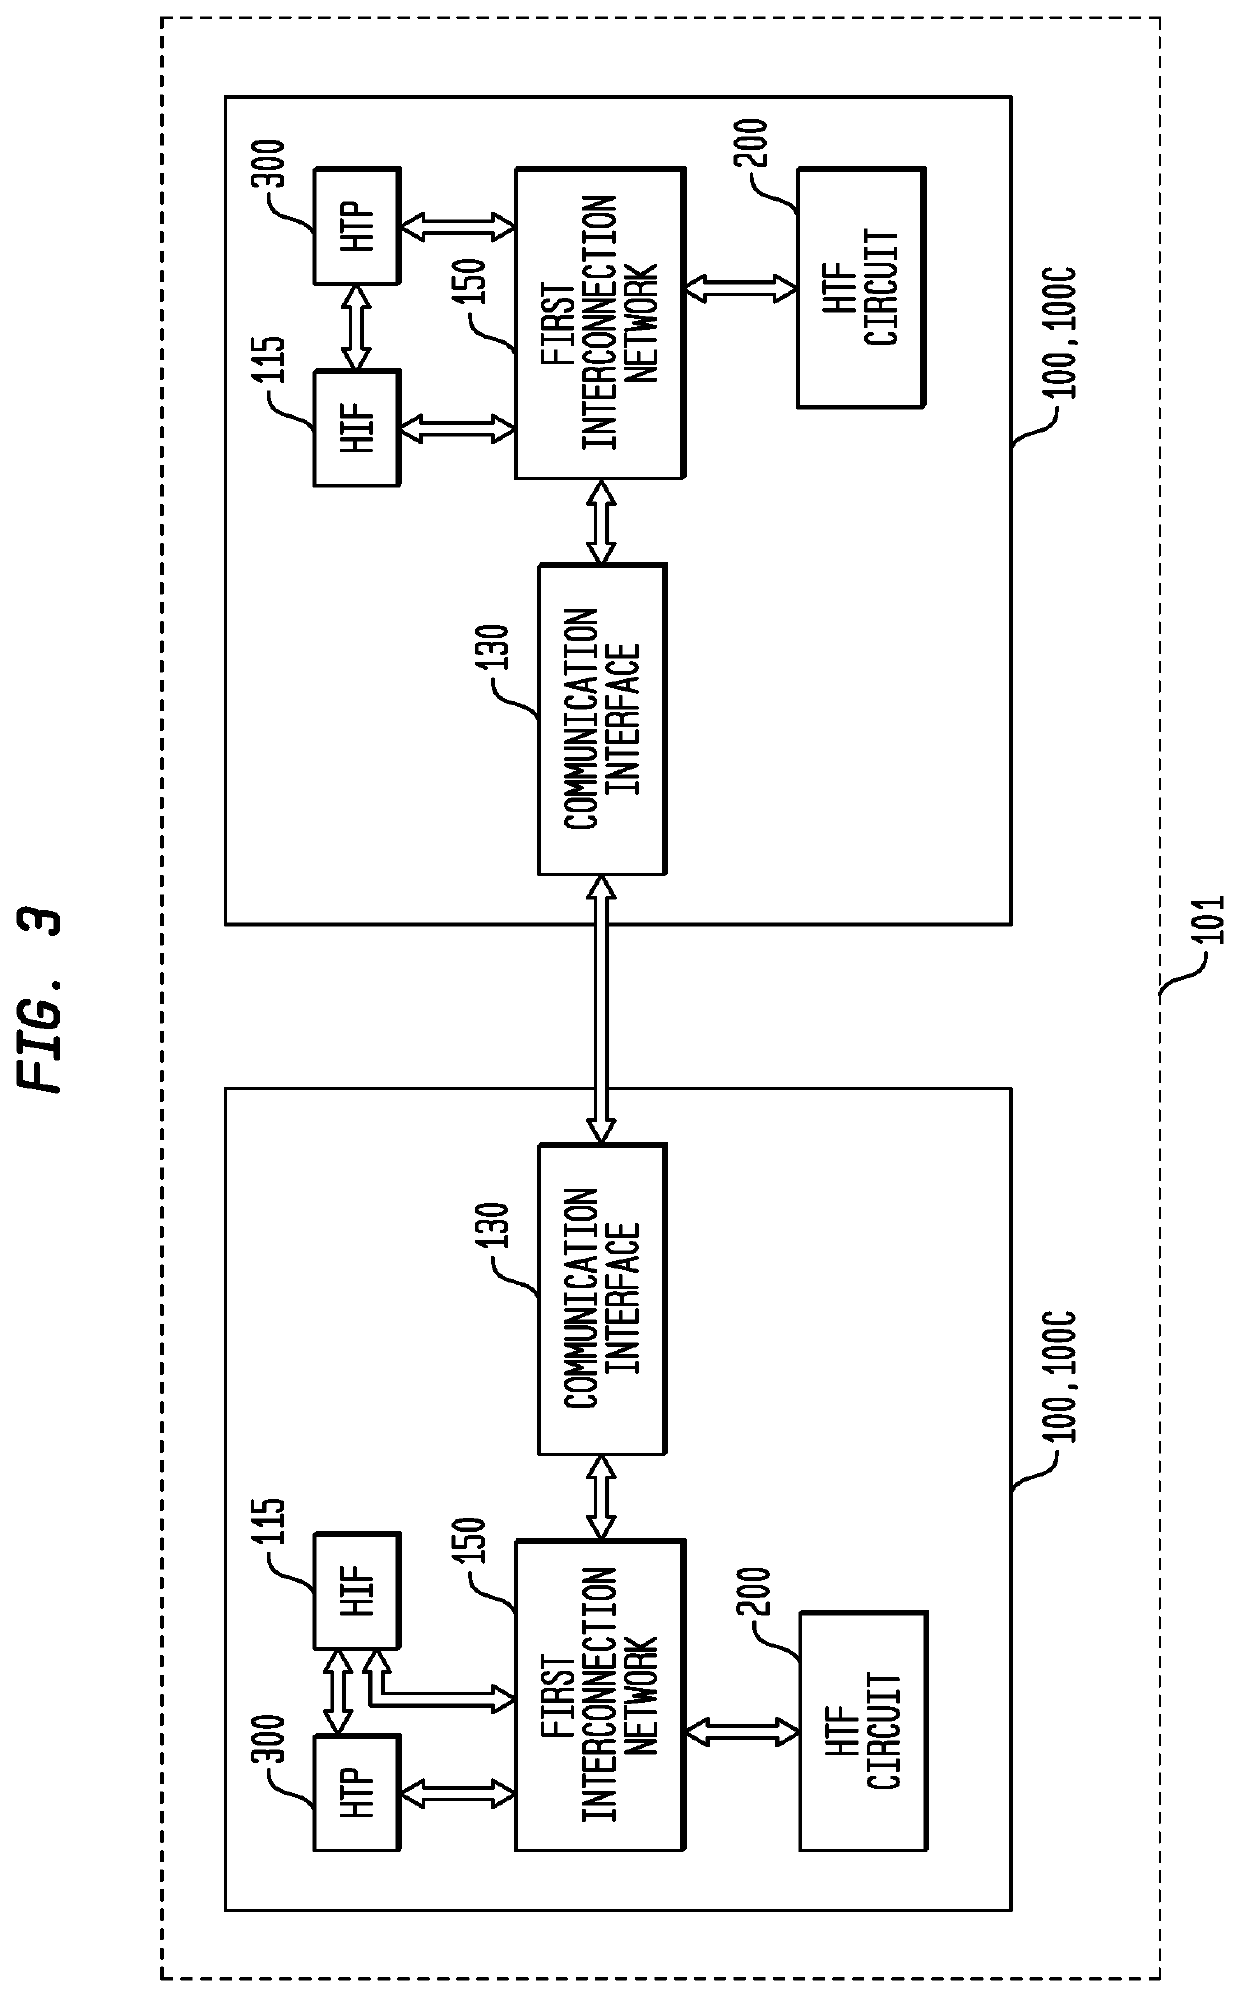 Efficient loop execution for a multi-threaded, self-scheduling reconfigurable computing fabric